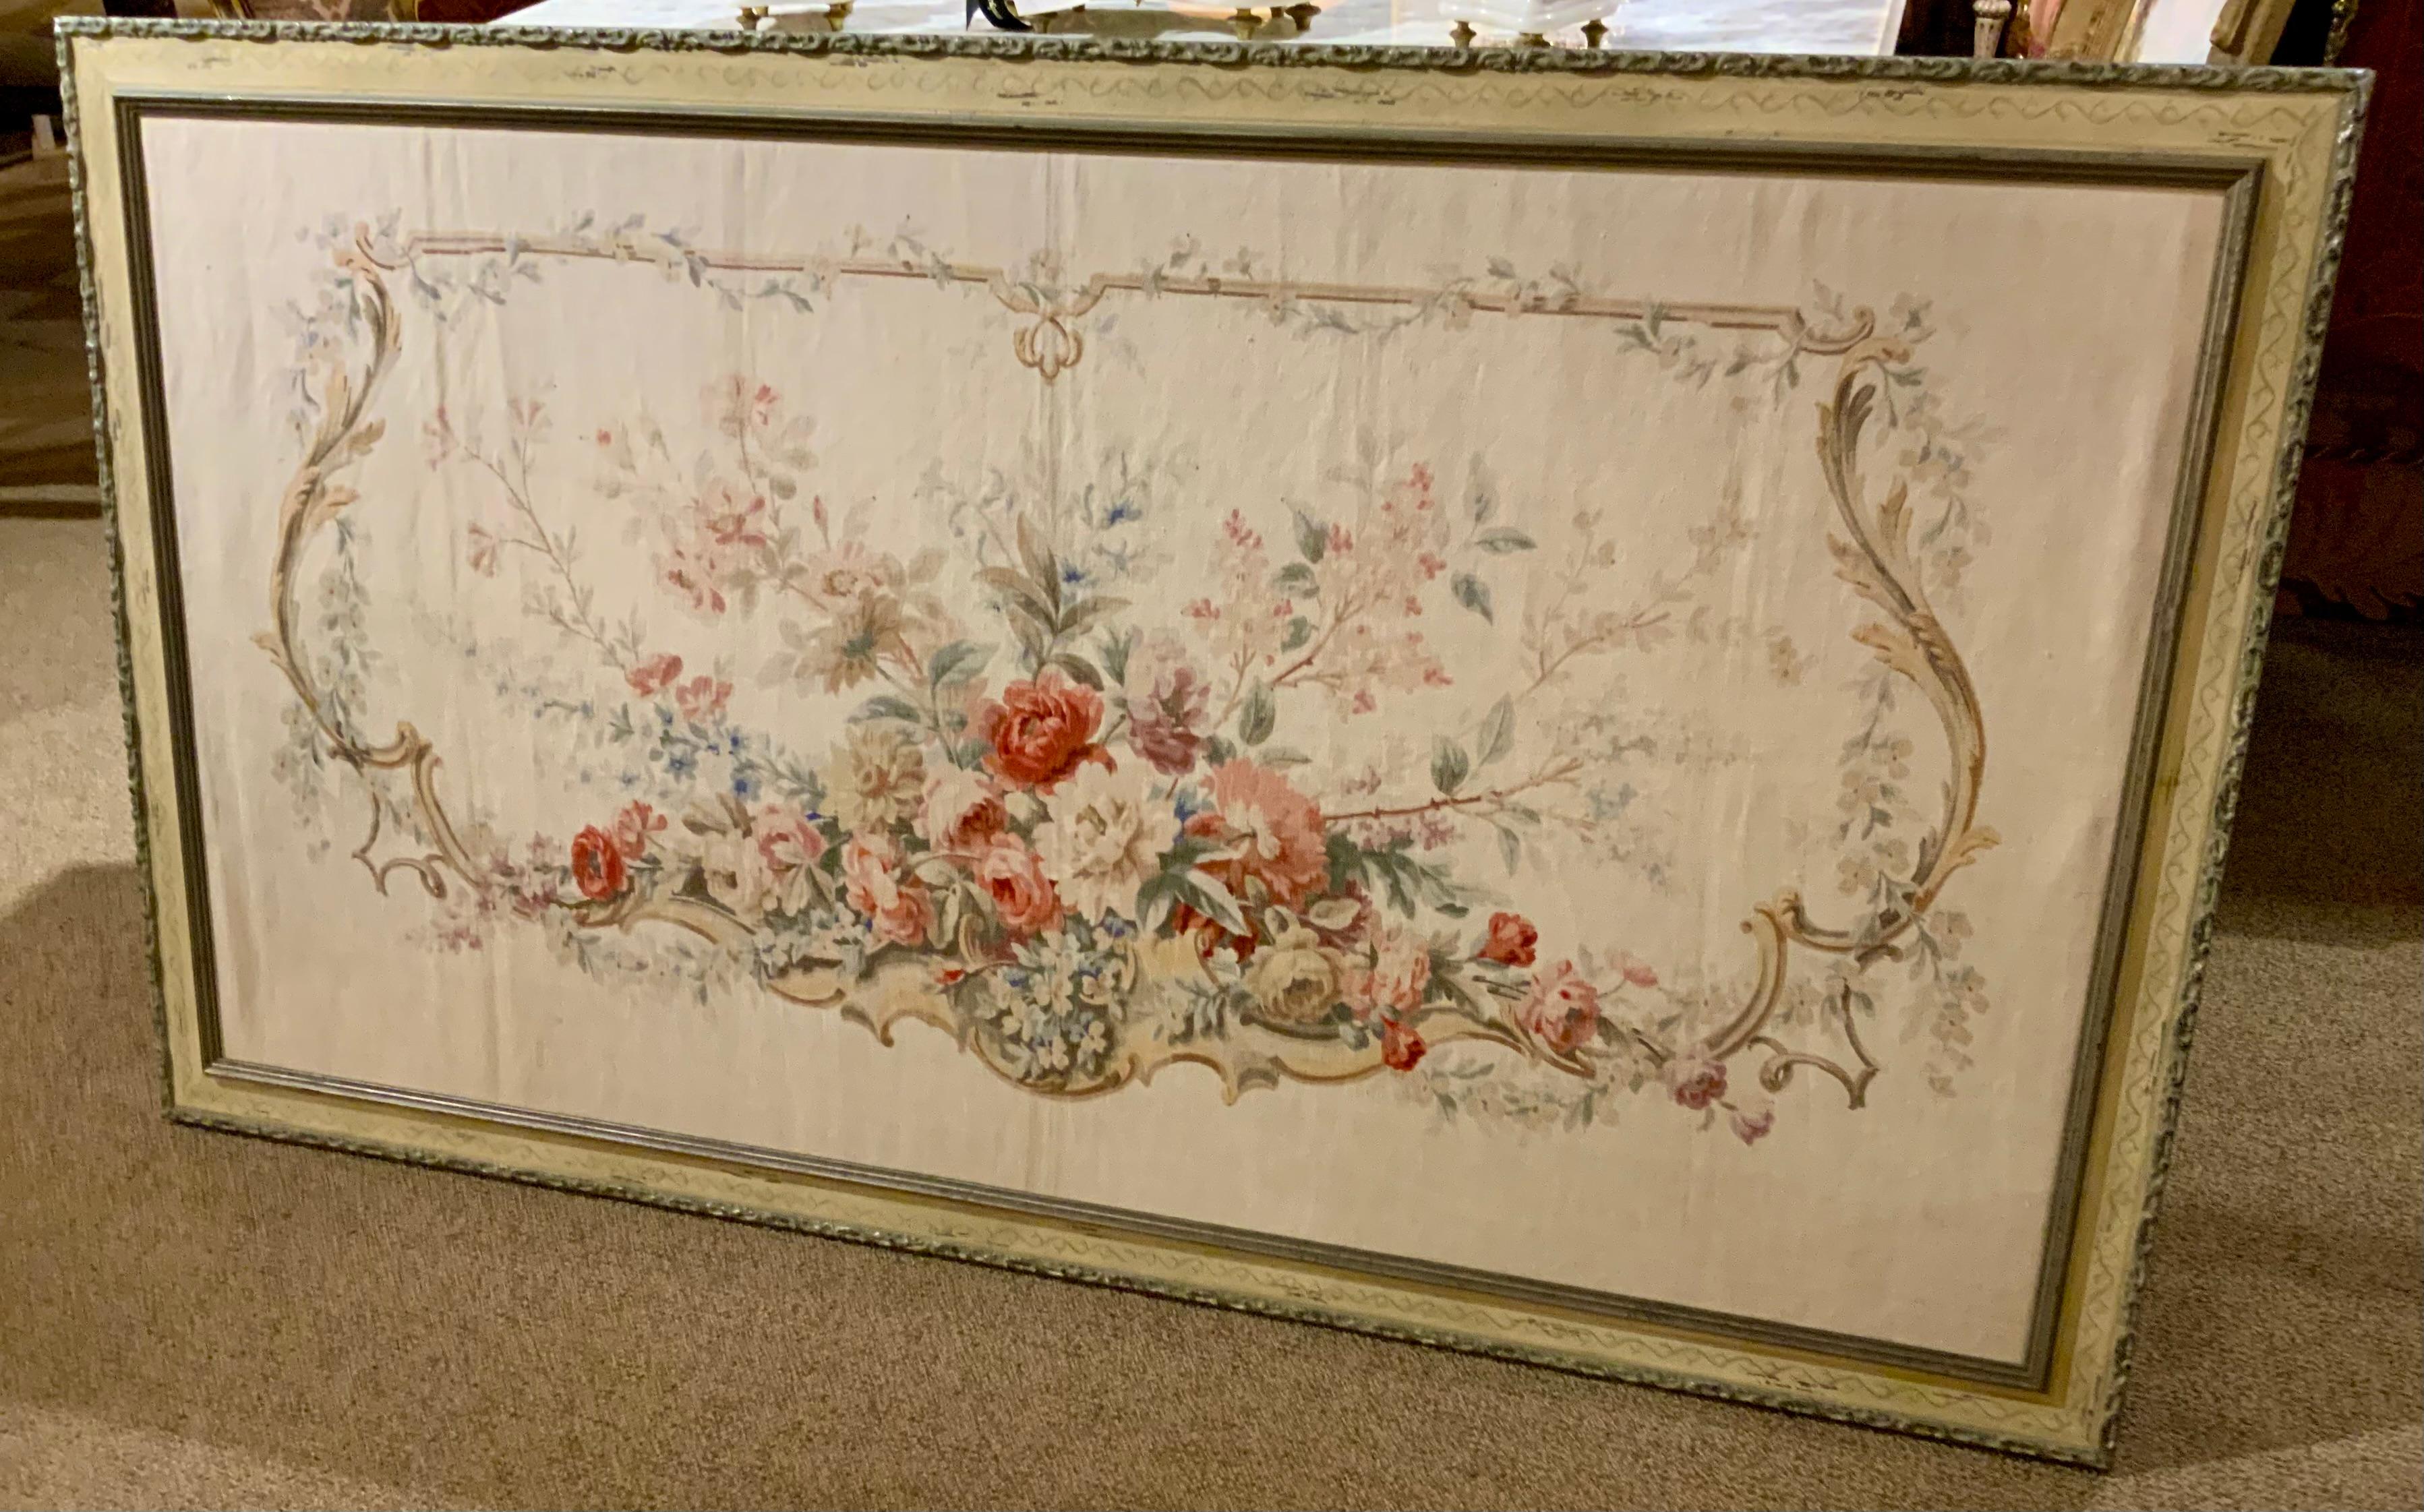 This tapestry is hand painted with a floral array of roses and
Flowers. It is painted on a linen type fabric. The frame is
Well done and hand painted in pale cream color with
A silver edge. Well painted and executed in a traditional 
Fashion. No